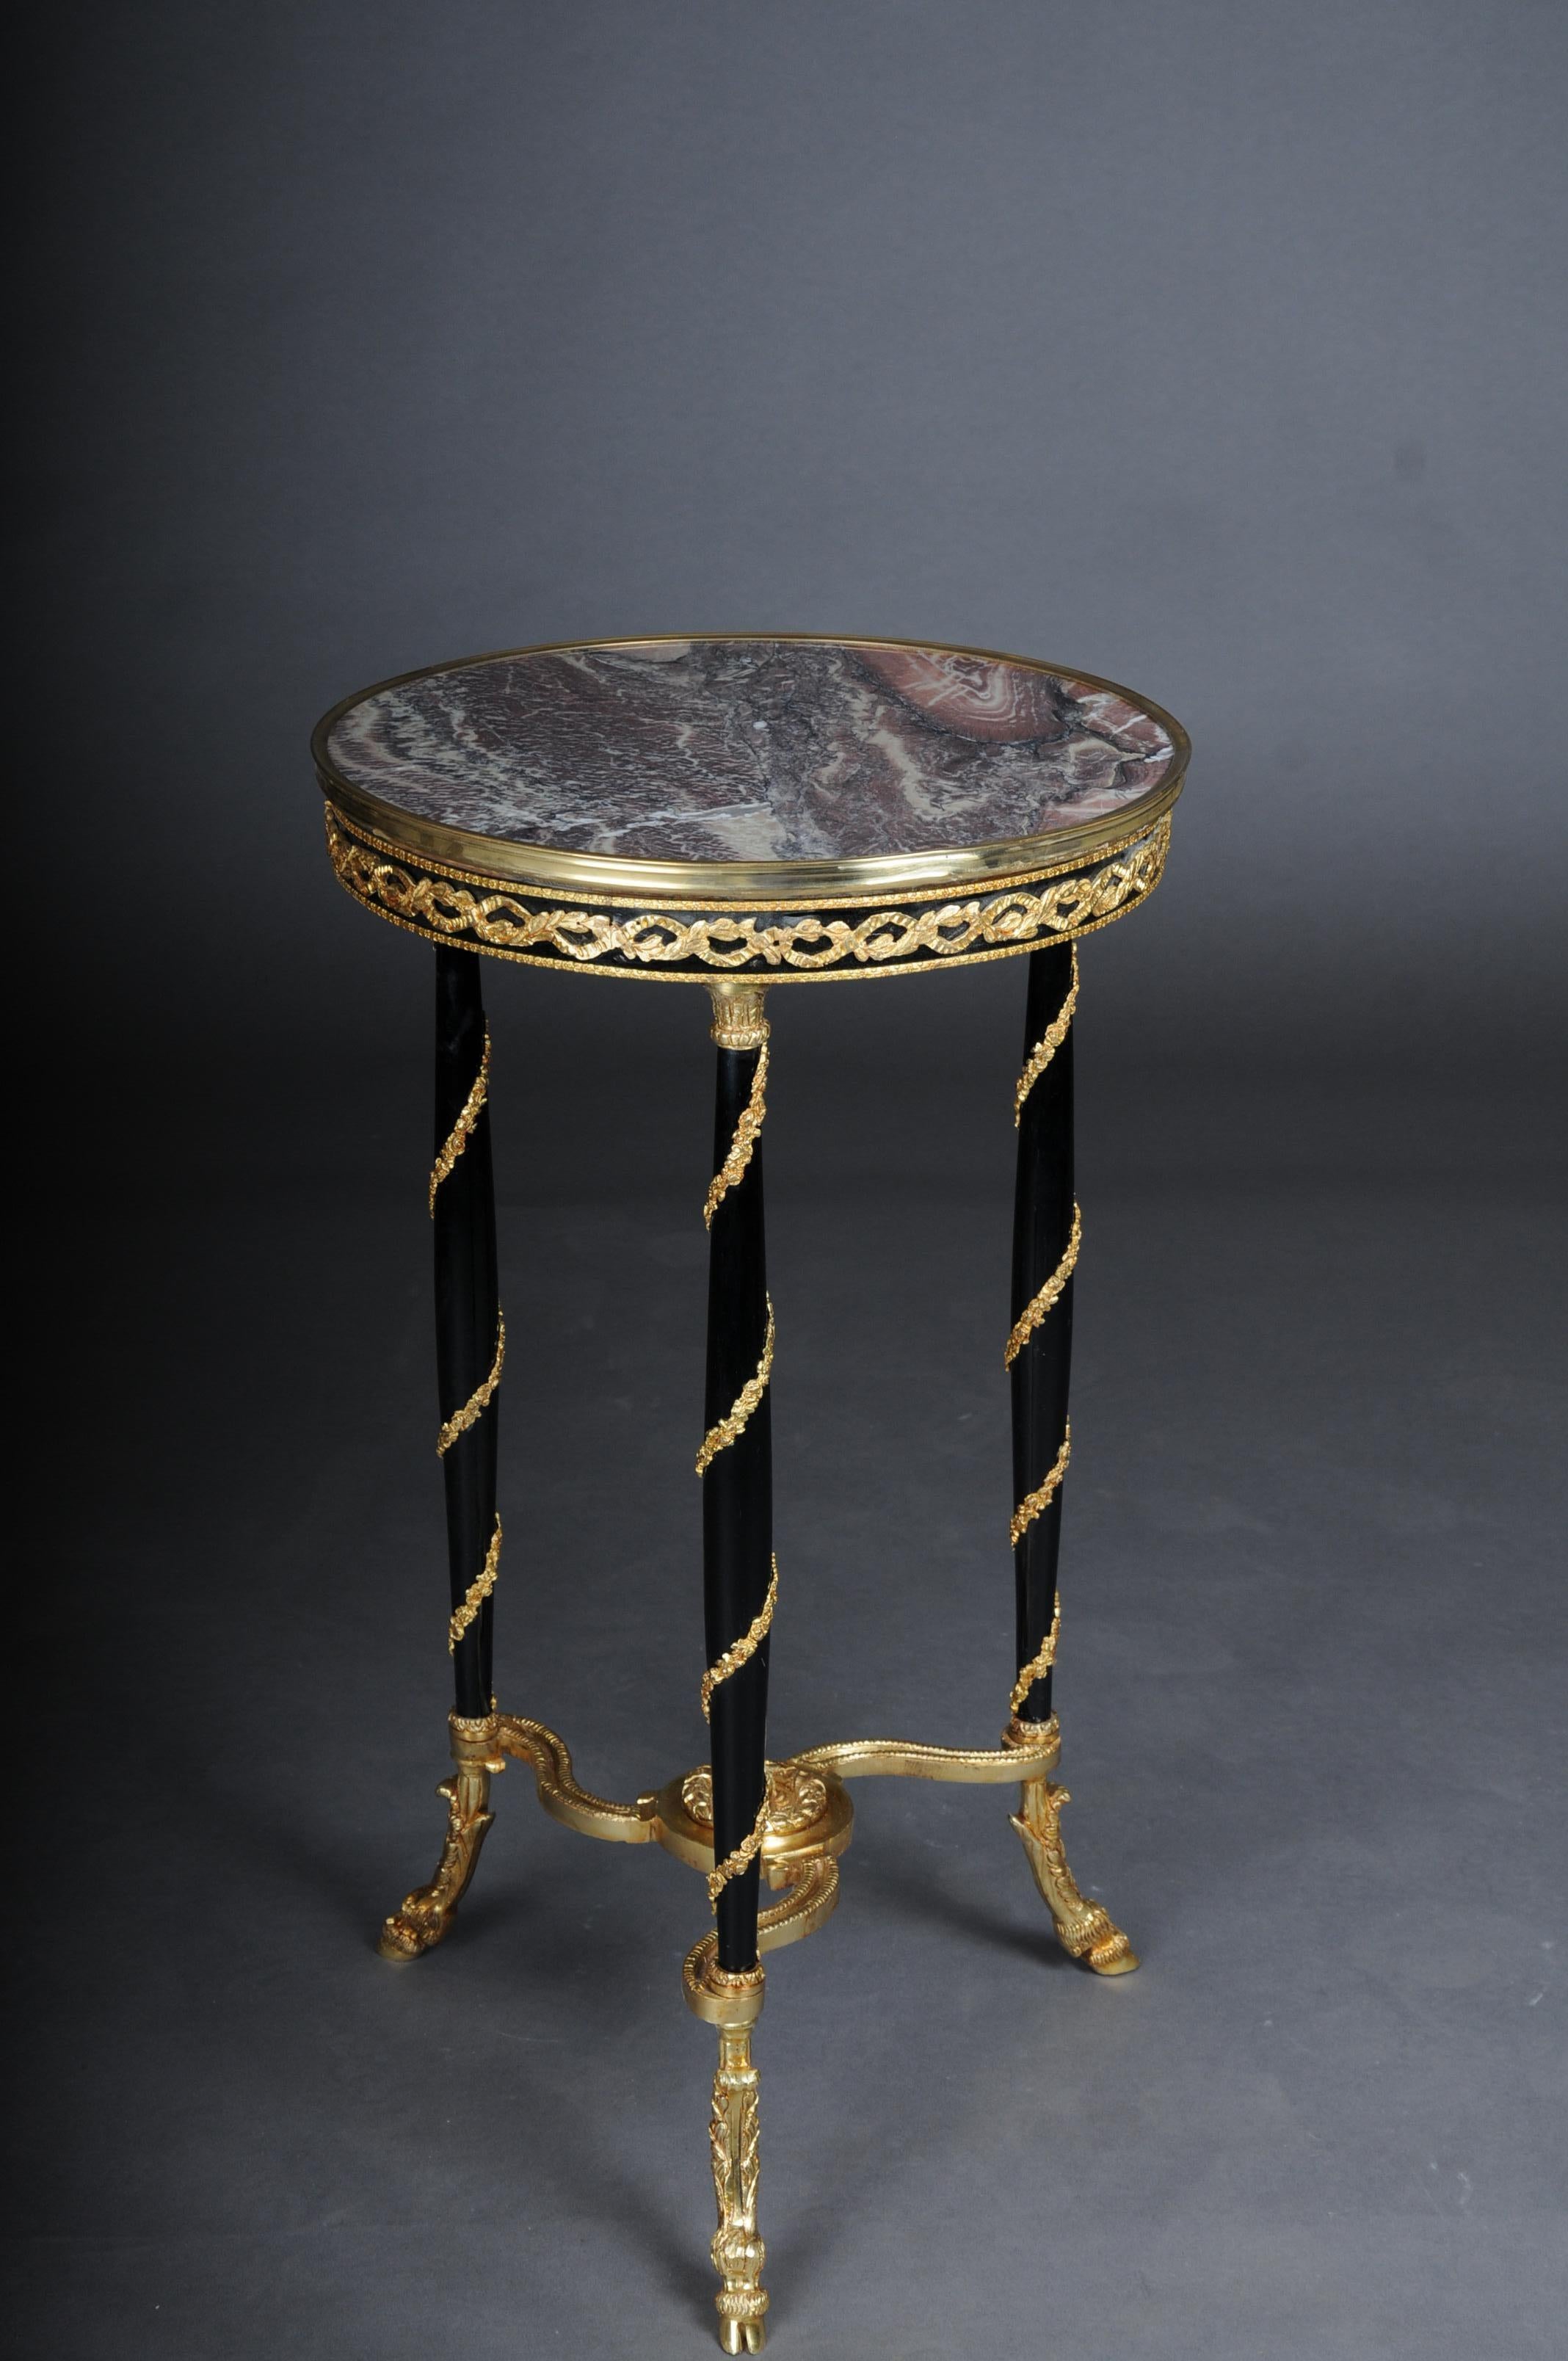 20th Century Majestic Empire side table/Gueridon Beechwood, Marble, Round,Black

Solid beech wood painted black with gilded brass bronze. Top plate with brass-framed marble top.
Elegant full column legs wrapped with gilded brass fittings.